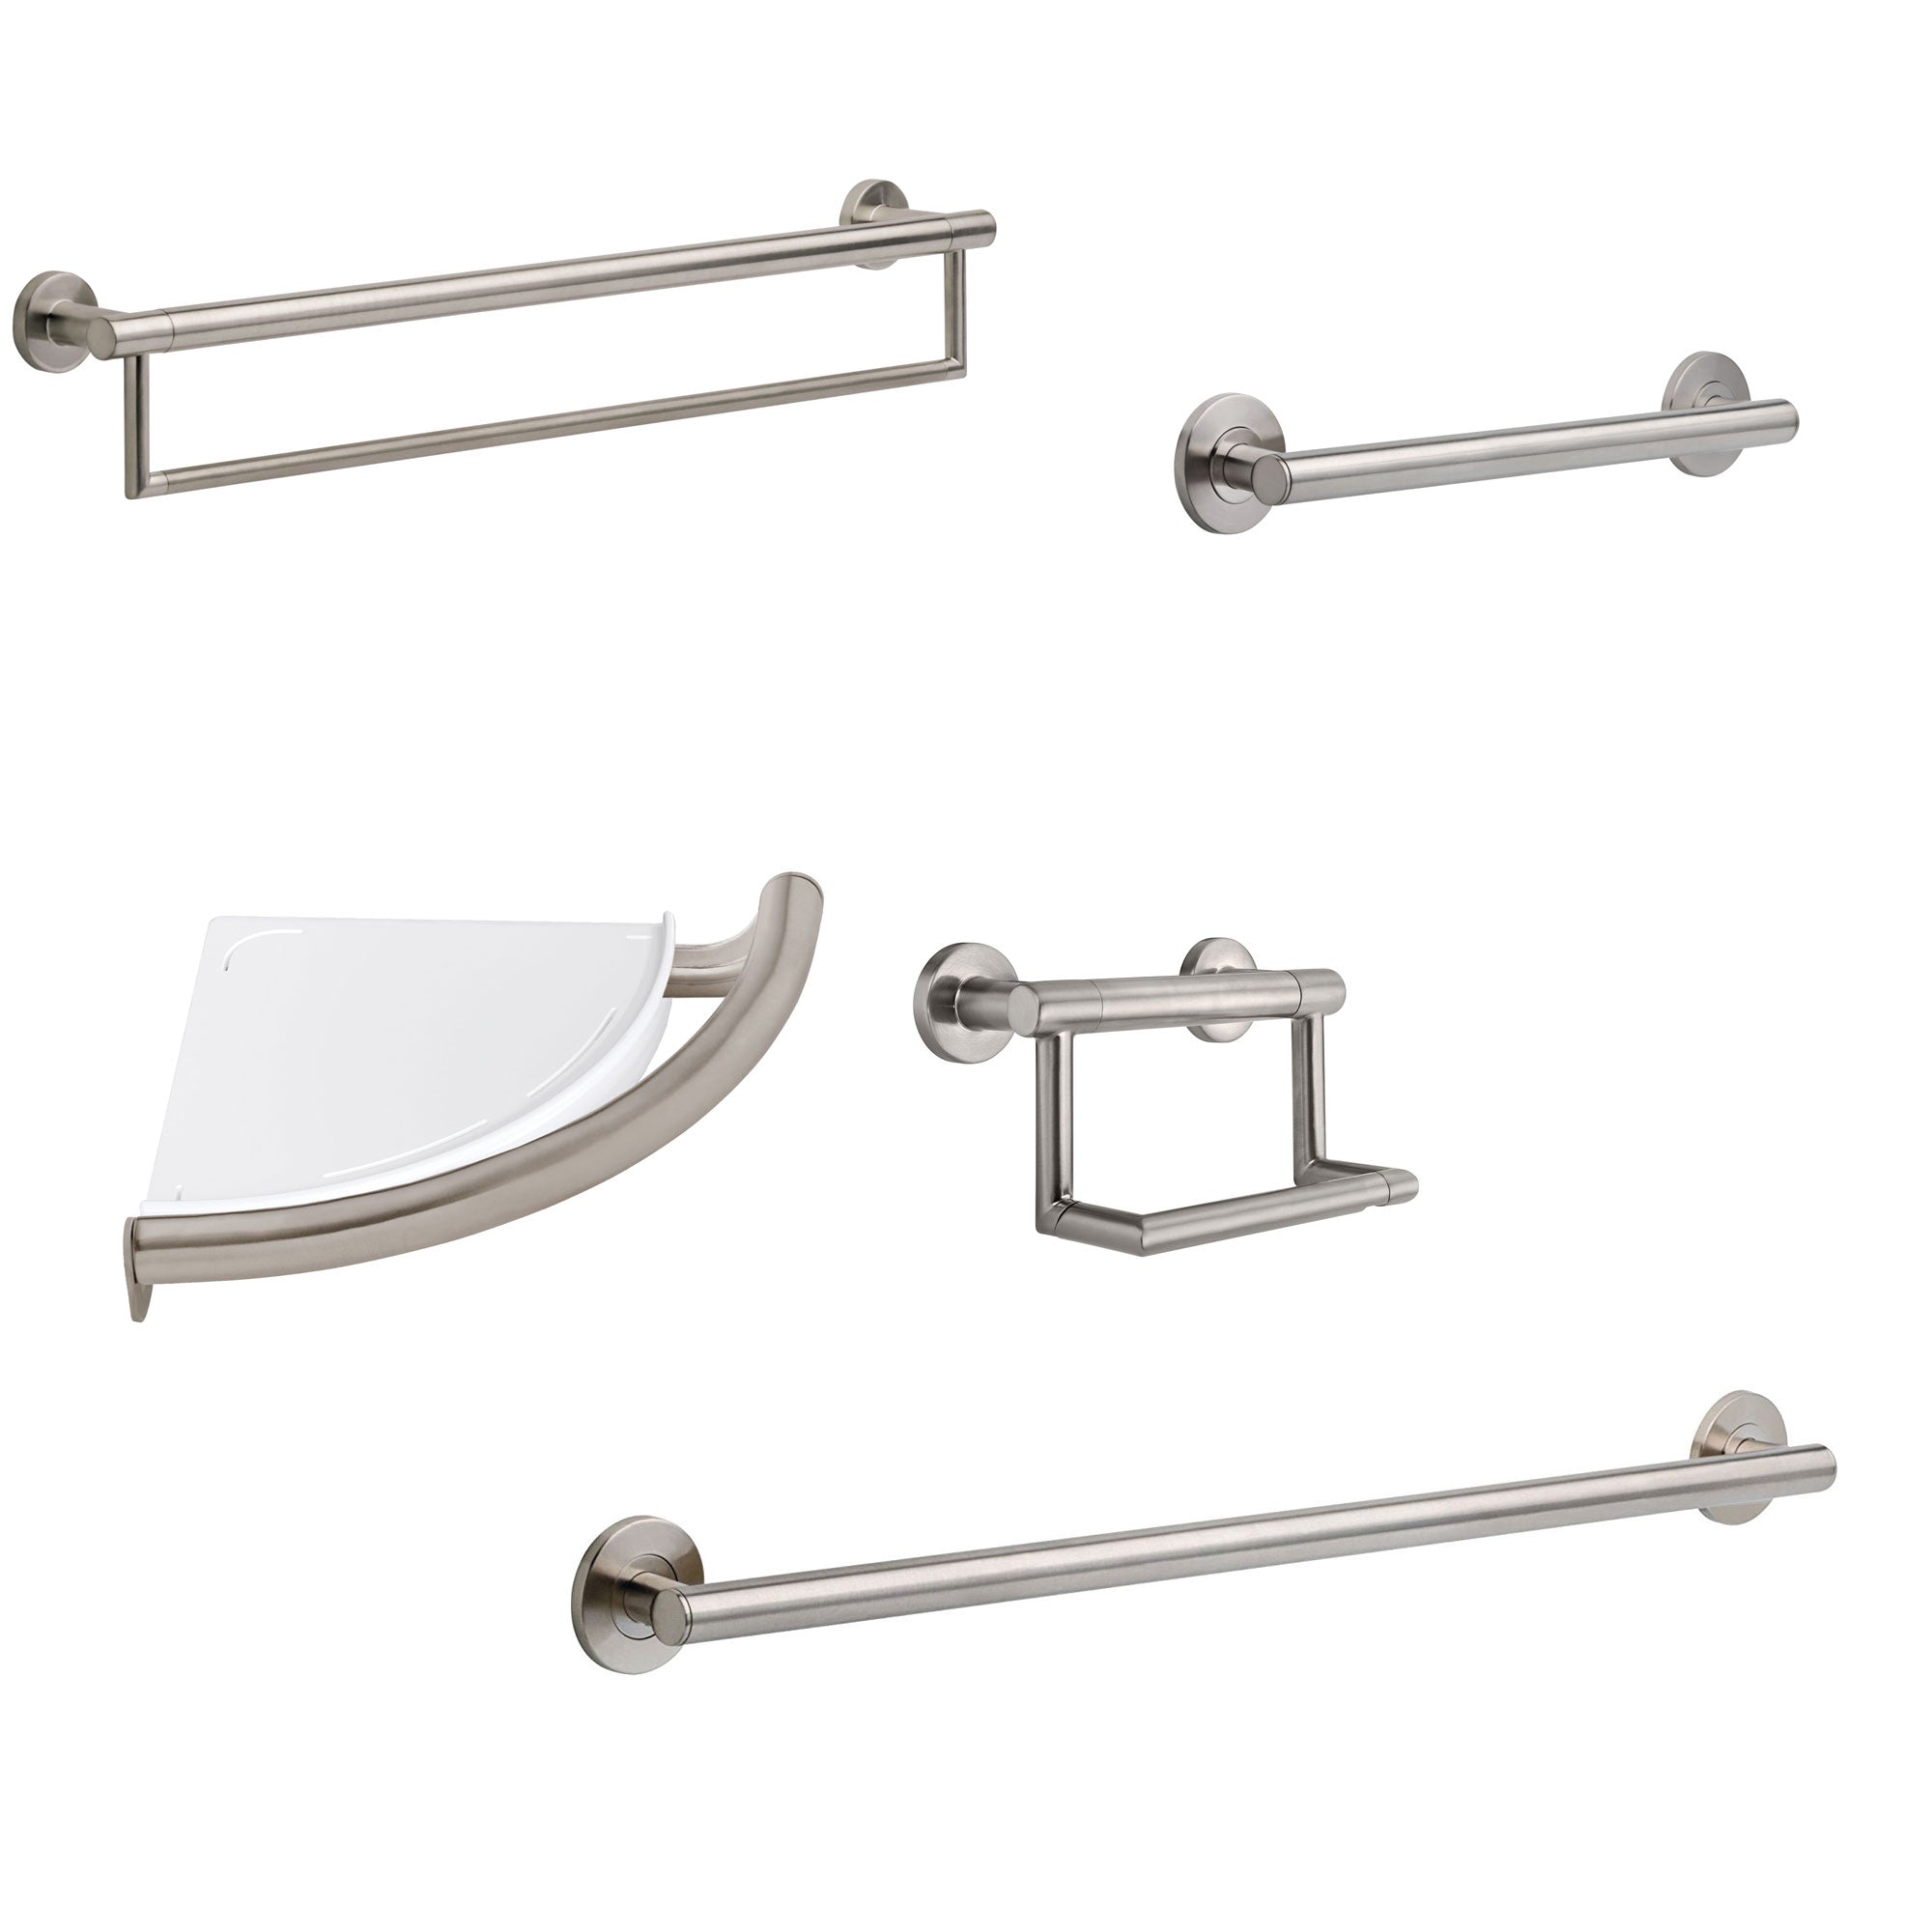 Delta Bath Safety Stainless Steel Finish DELUXE Accessory Set Includes: 18" and 36" Single Grab Bar, Corner Shelf, TP Holder, 24" Double Bar D10113AP